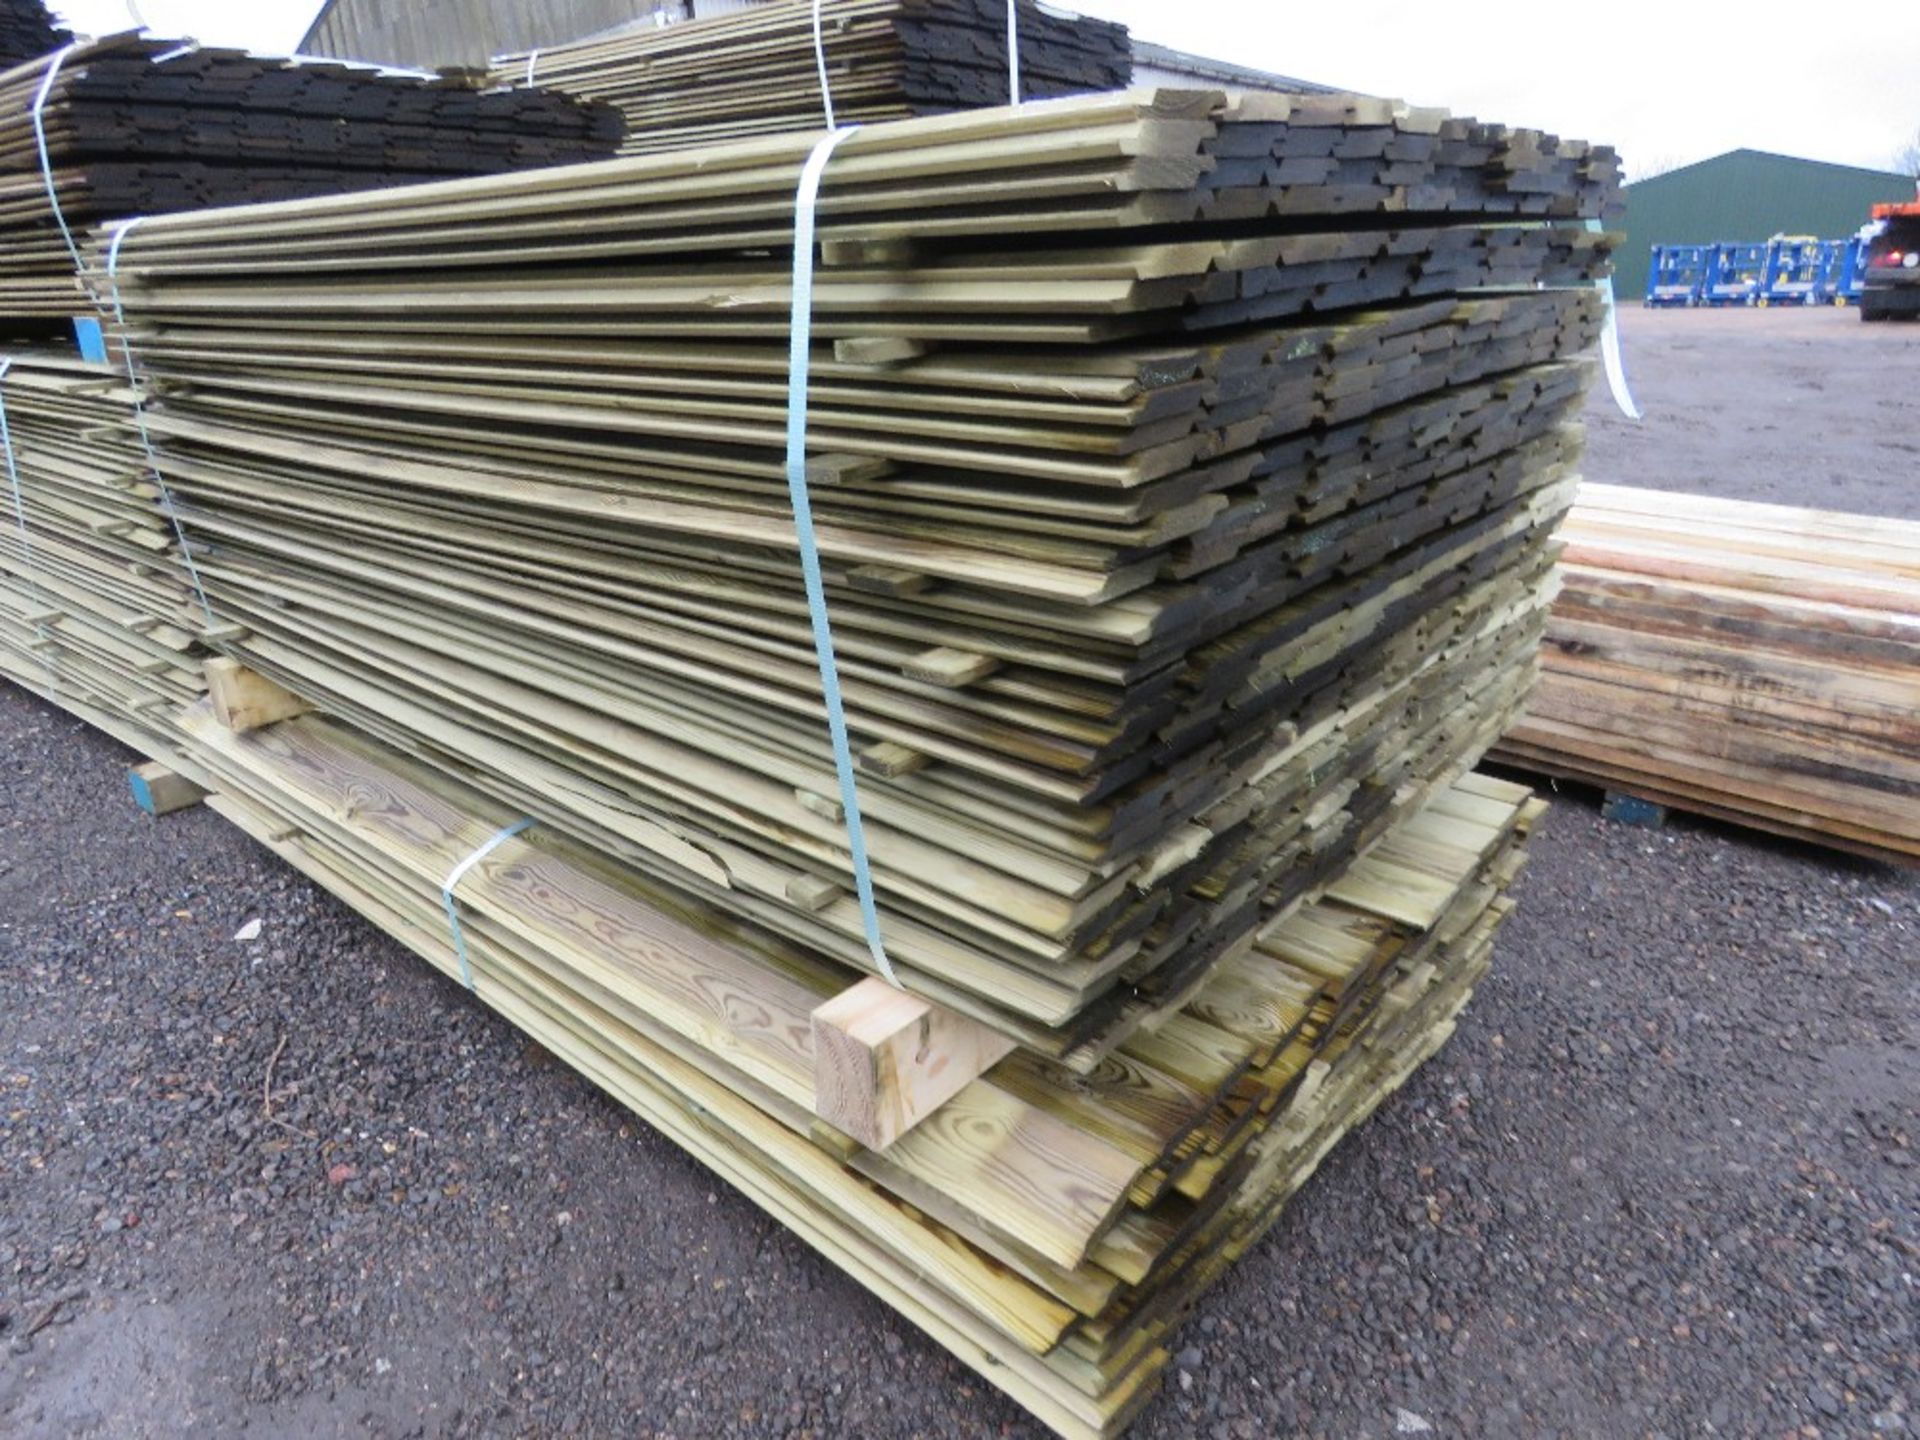 2 X PACKS OF TREATED SHIPLAP TIMBER CLADDING BOARDS: 1.73M LENGTH X 100MM WIDTH APPROX. BIG PACK AND